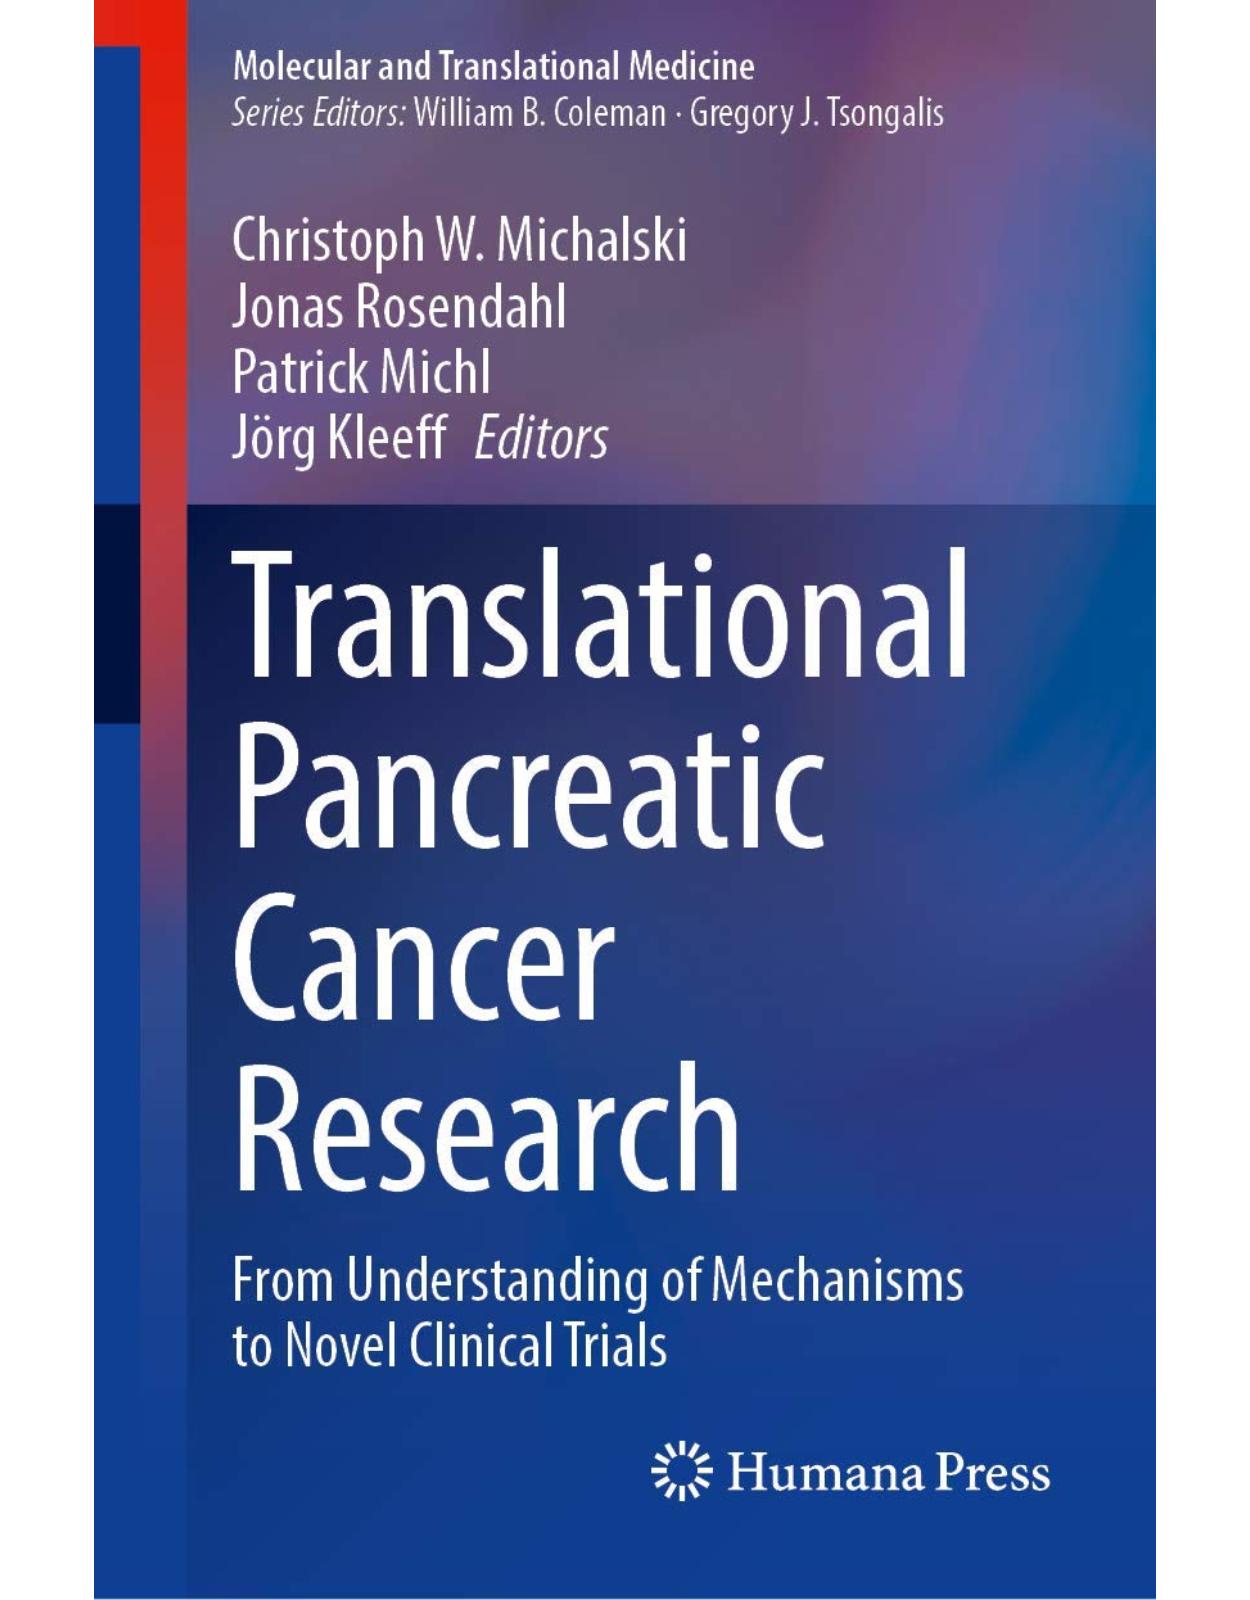 Translational Pancreatic Cancer Research From Understanding of Mechanisms to Novel Clinical Trials